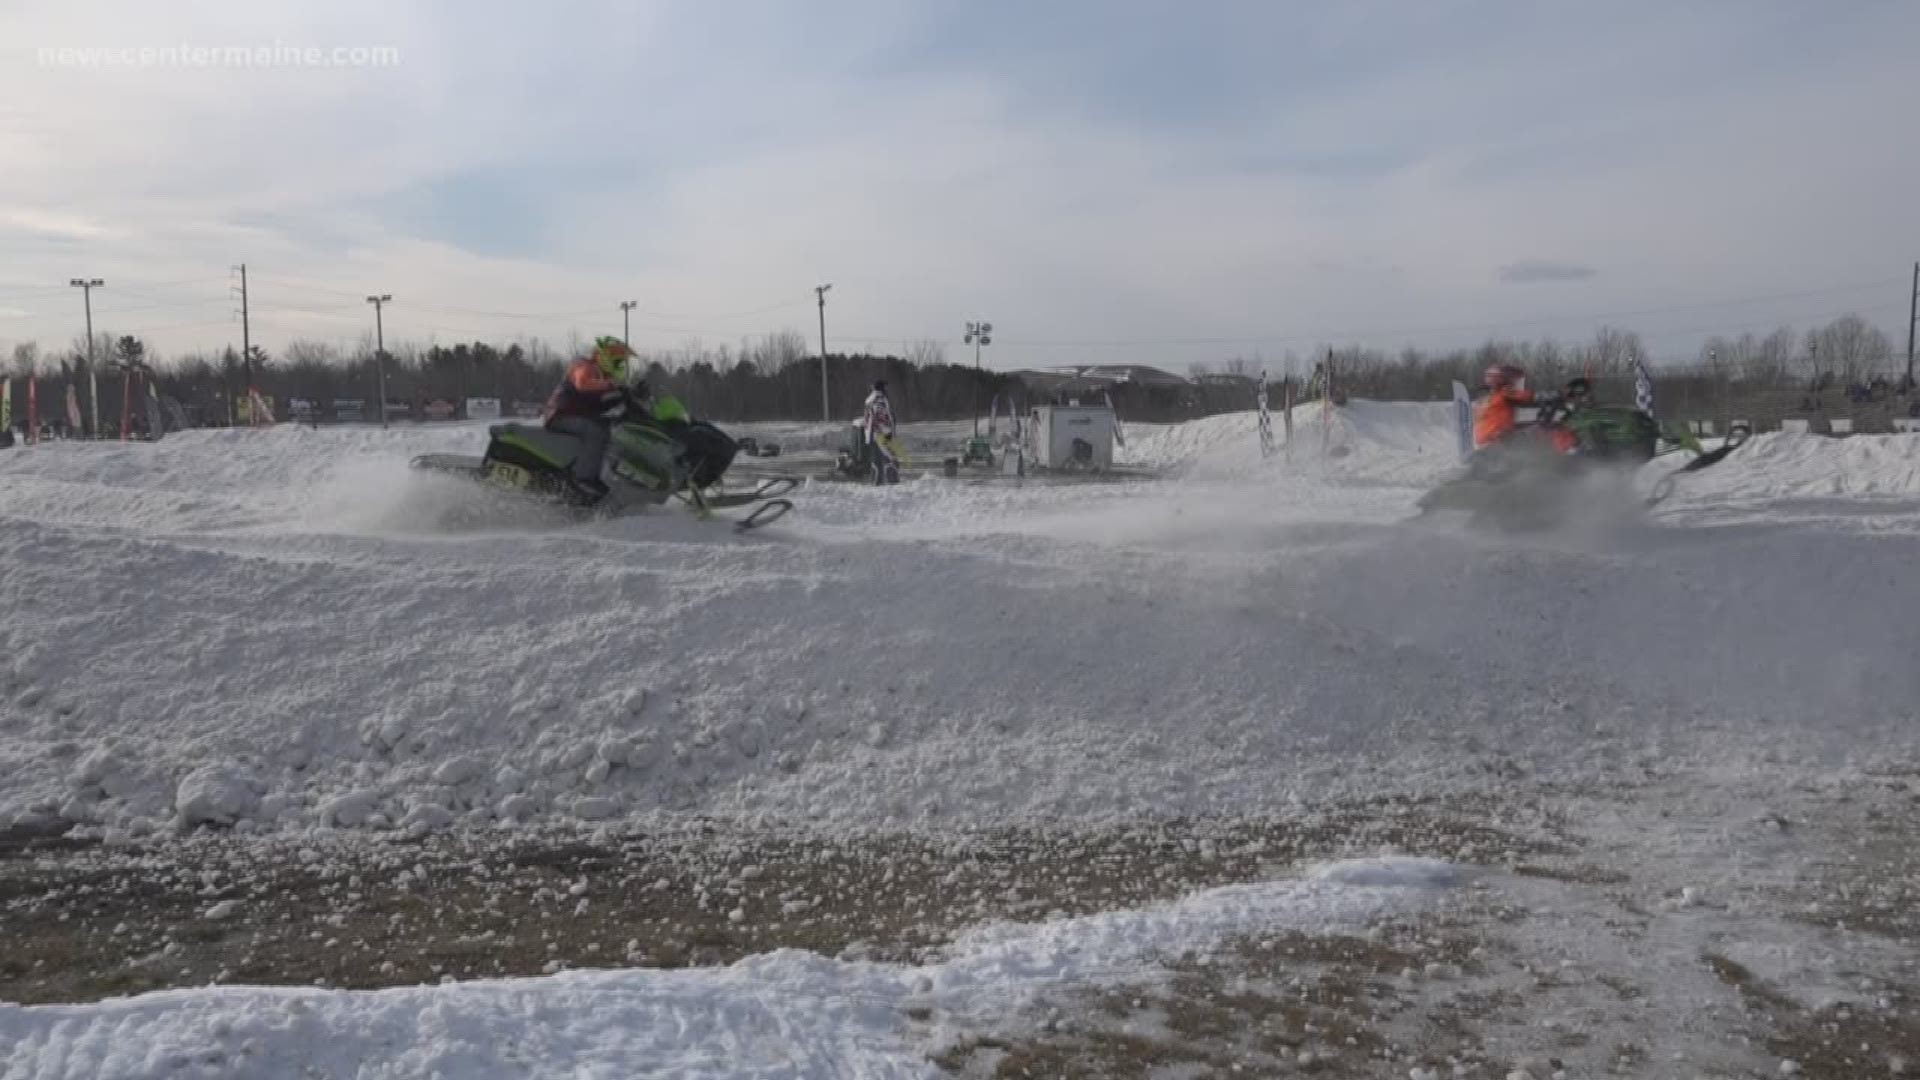 5th annual Snow-Cross weekend event at Hermon's Speedway 95.